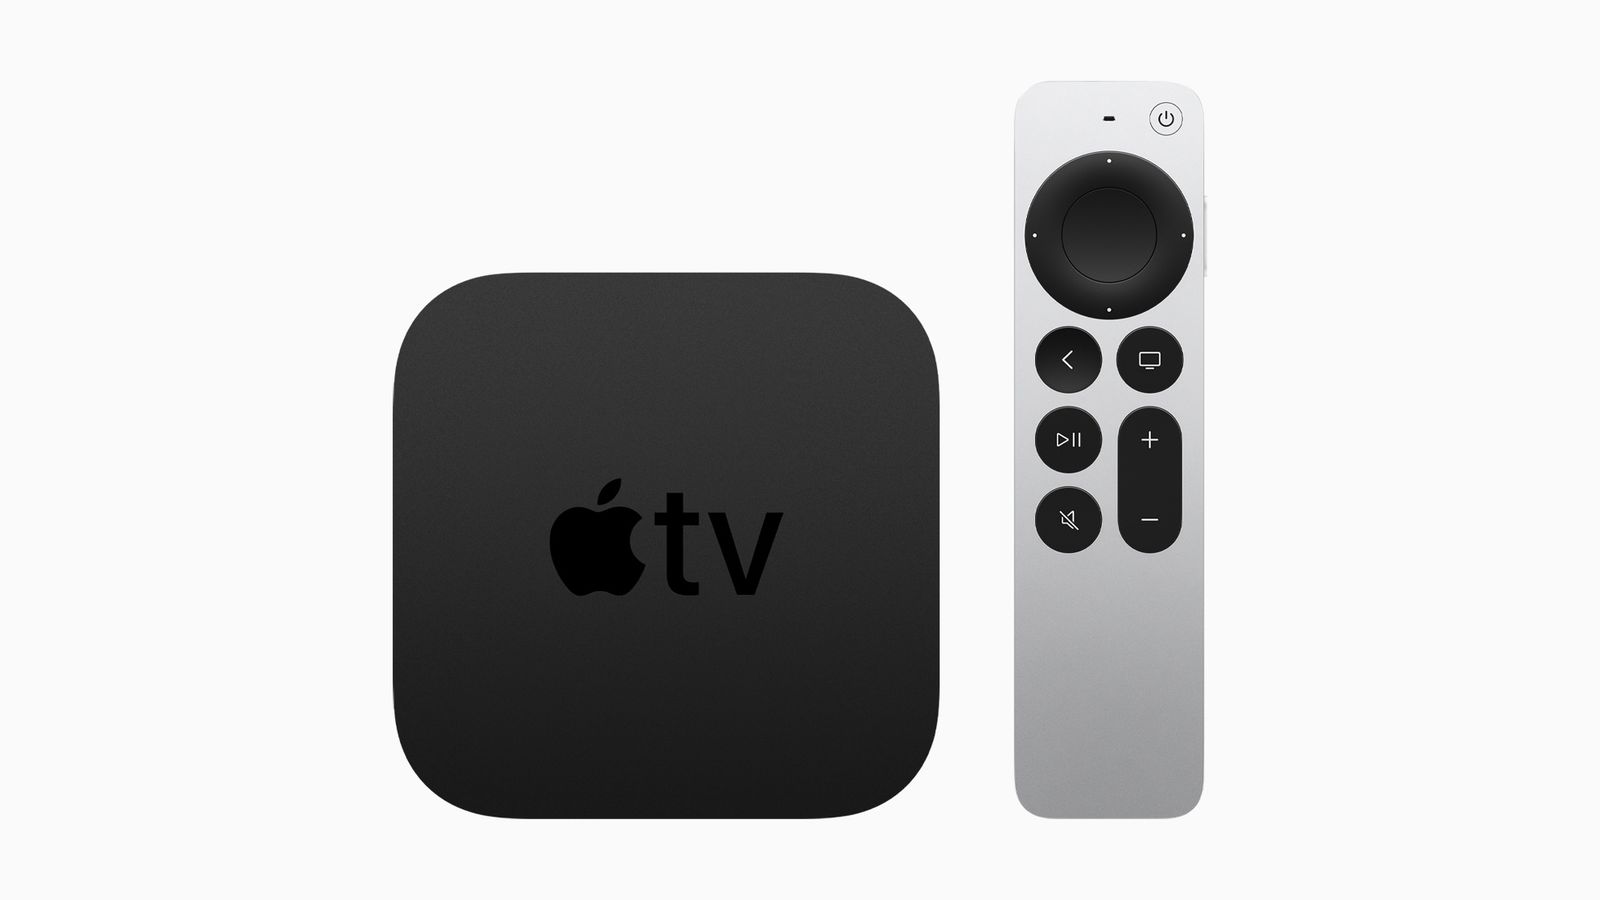 New Apple TV 4K Supports WiFi 6, Thread and HDMI 2.1 - MacRumors